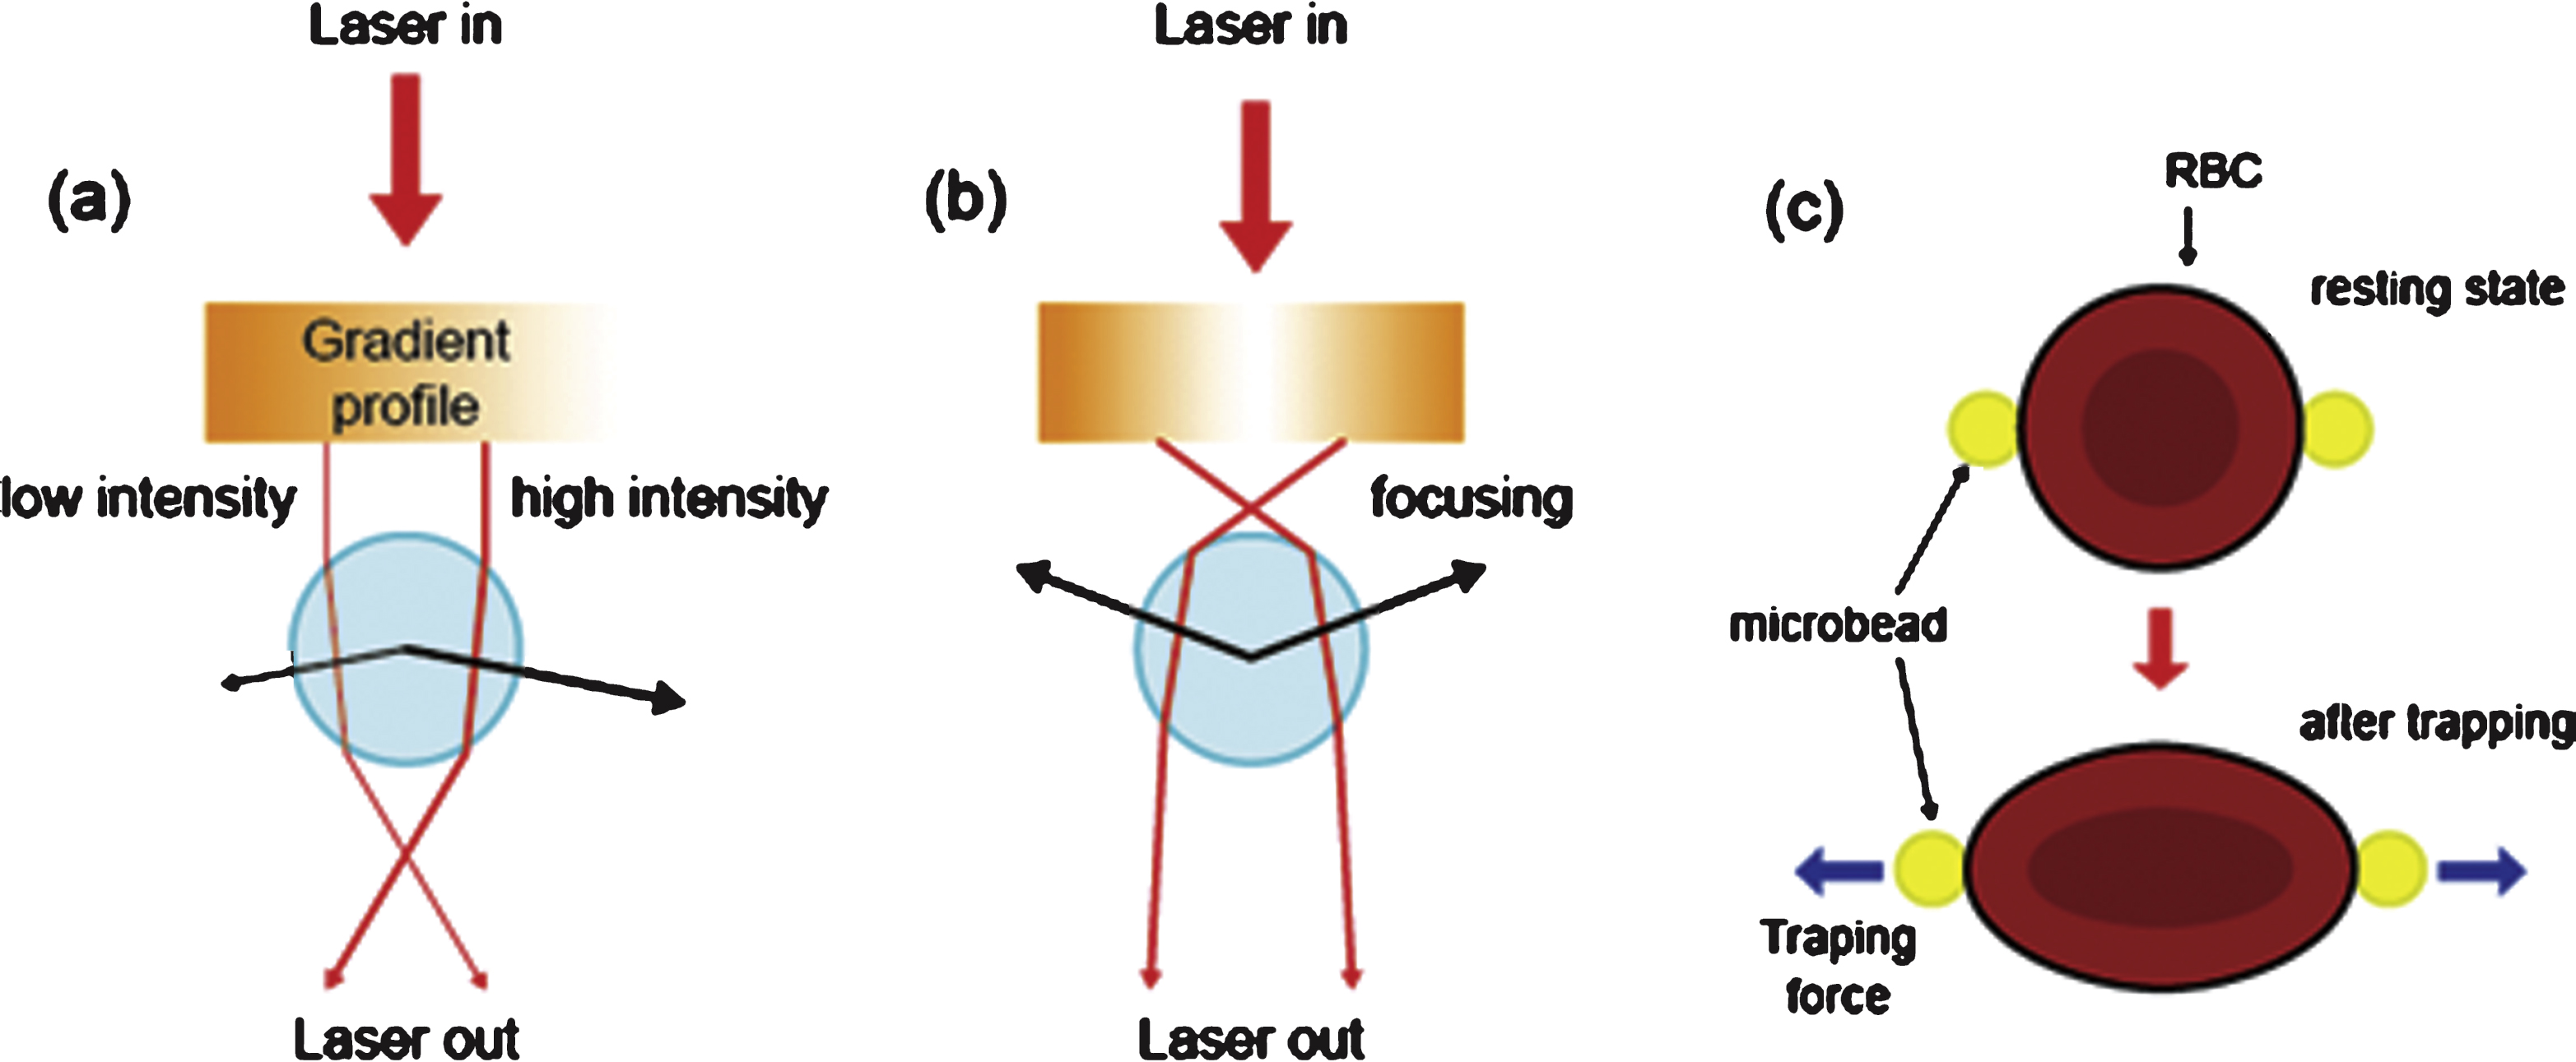 Optical tweezers used for measuring the deformability of red blood cells (RBCs) with focused laser beams that transfer (a) linear momentum or (b) angular momentum of light. (c) To measure the shear modulus of the RBCs, two microbeads are attached to the opposite sides of a RBC.